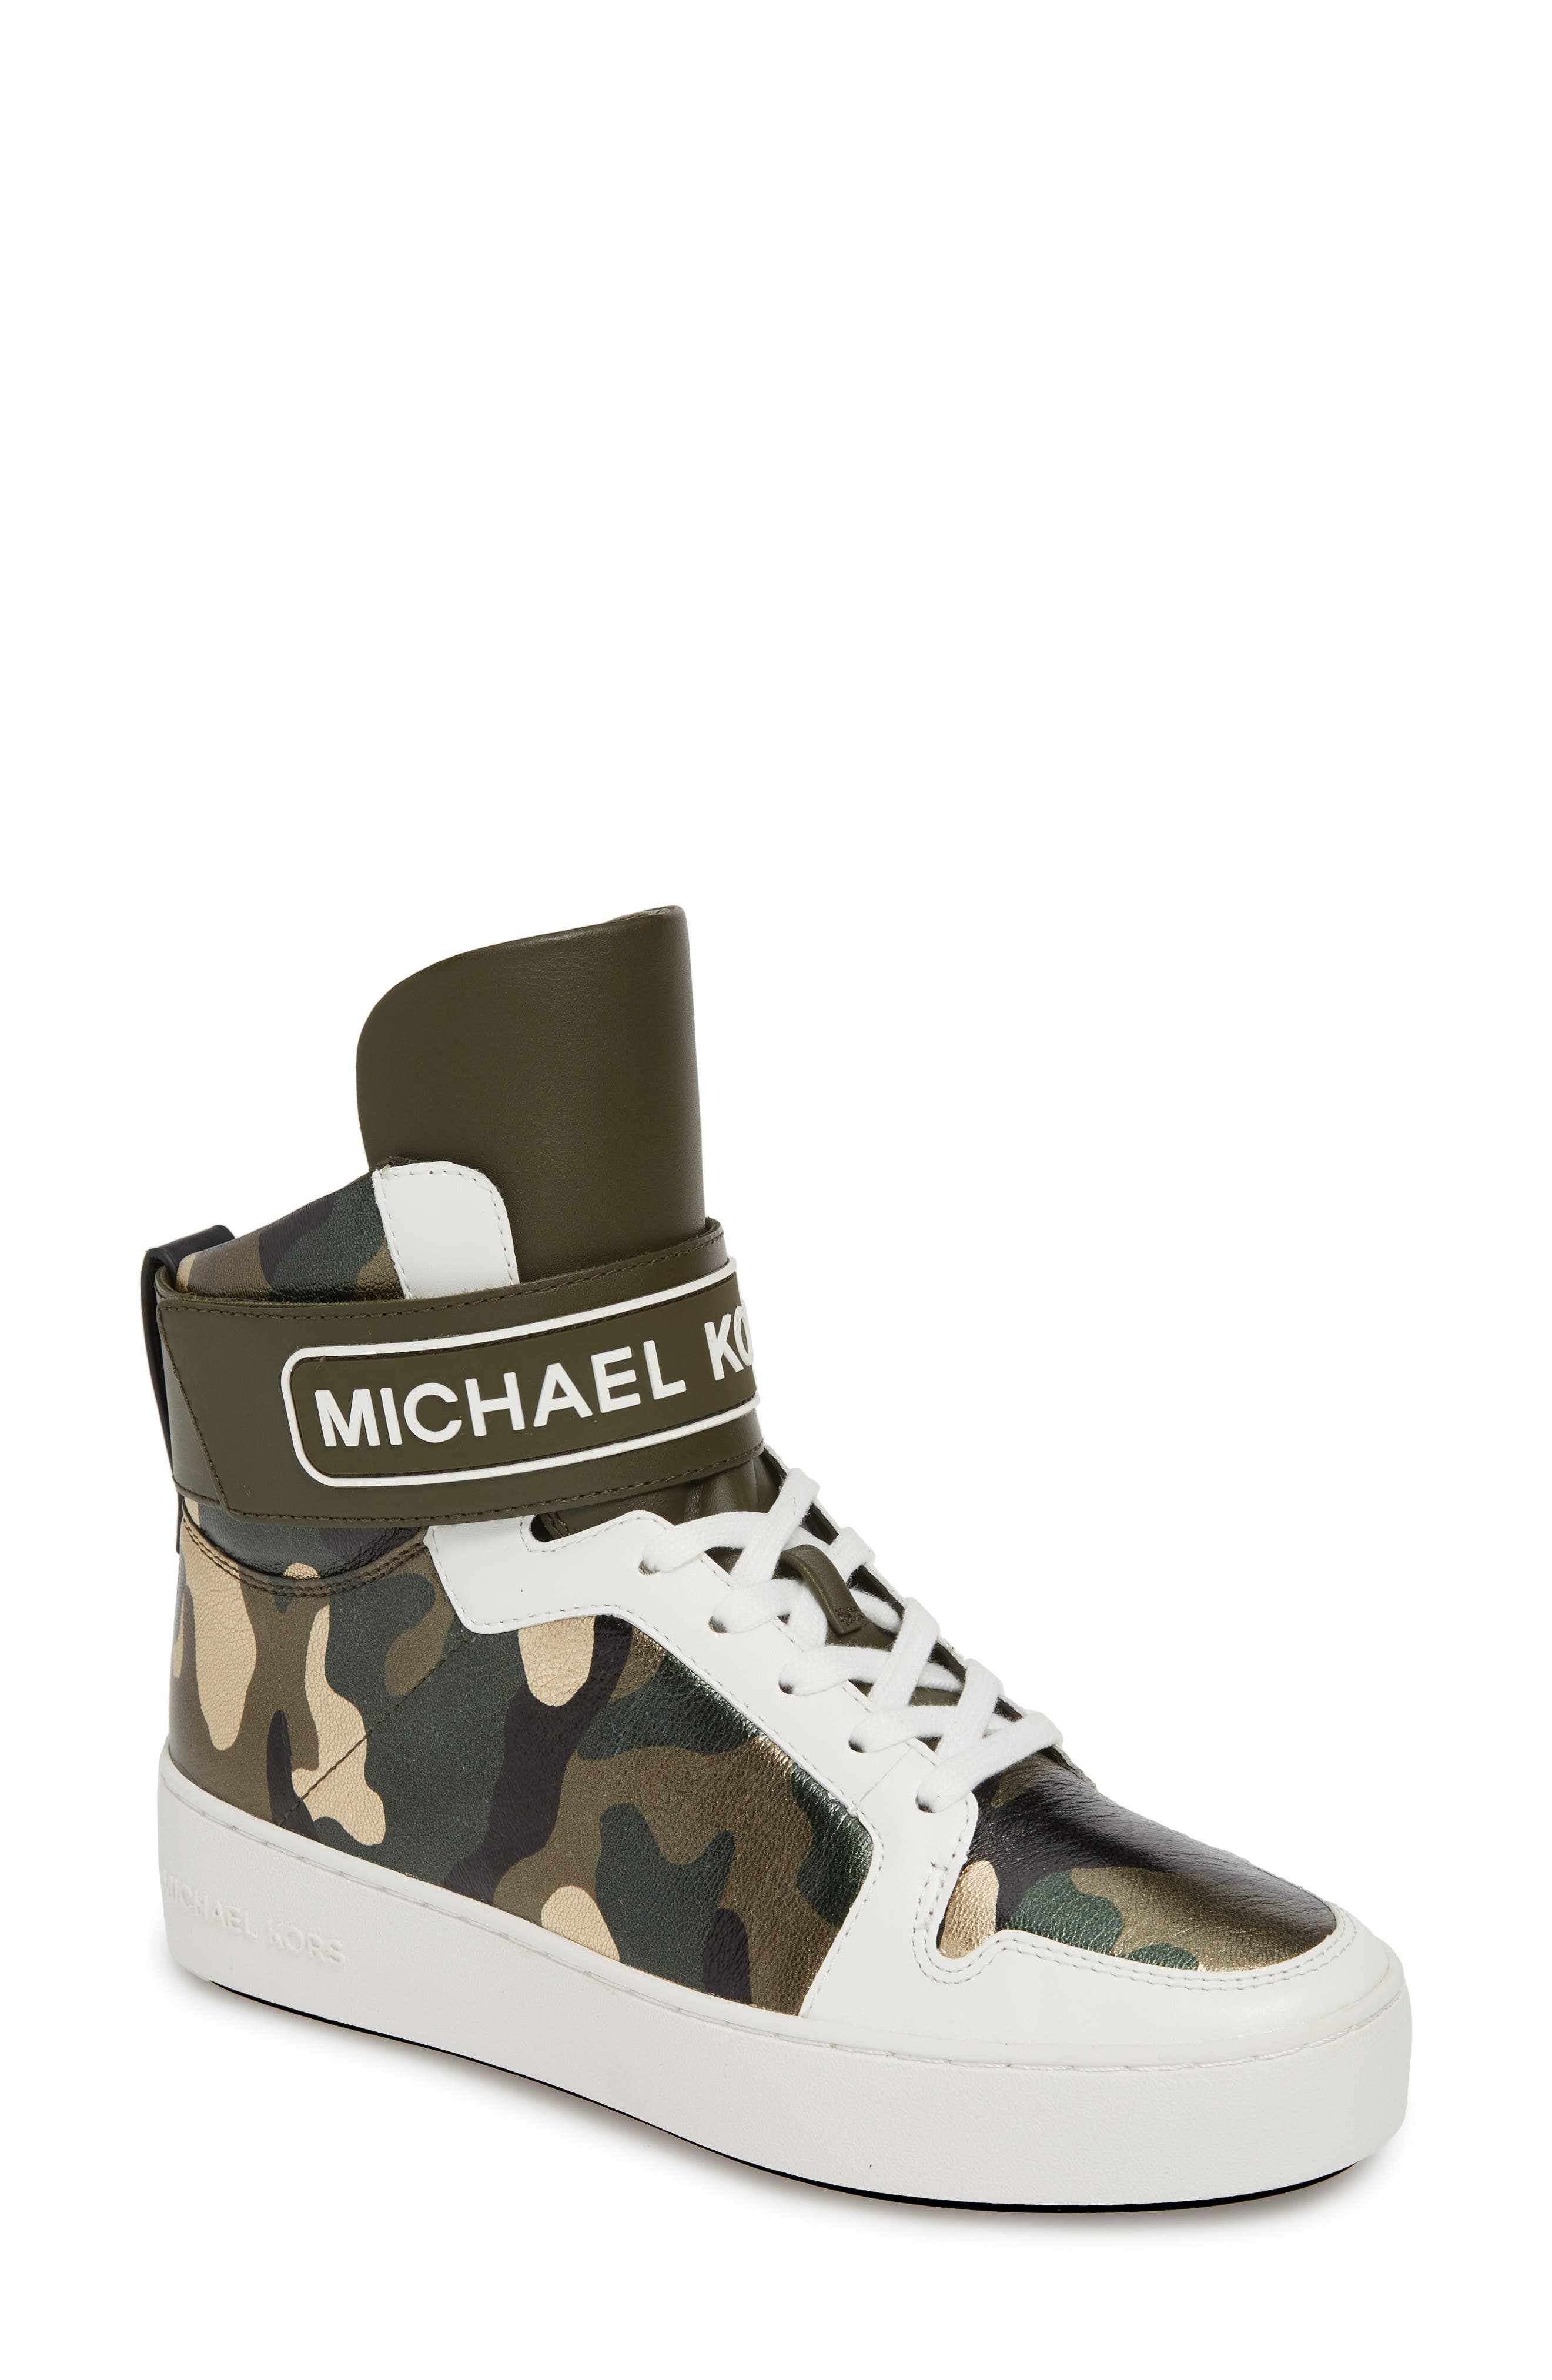 michael kors camouflage shoes